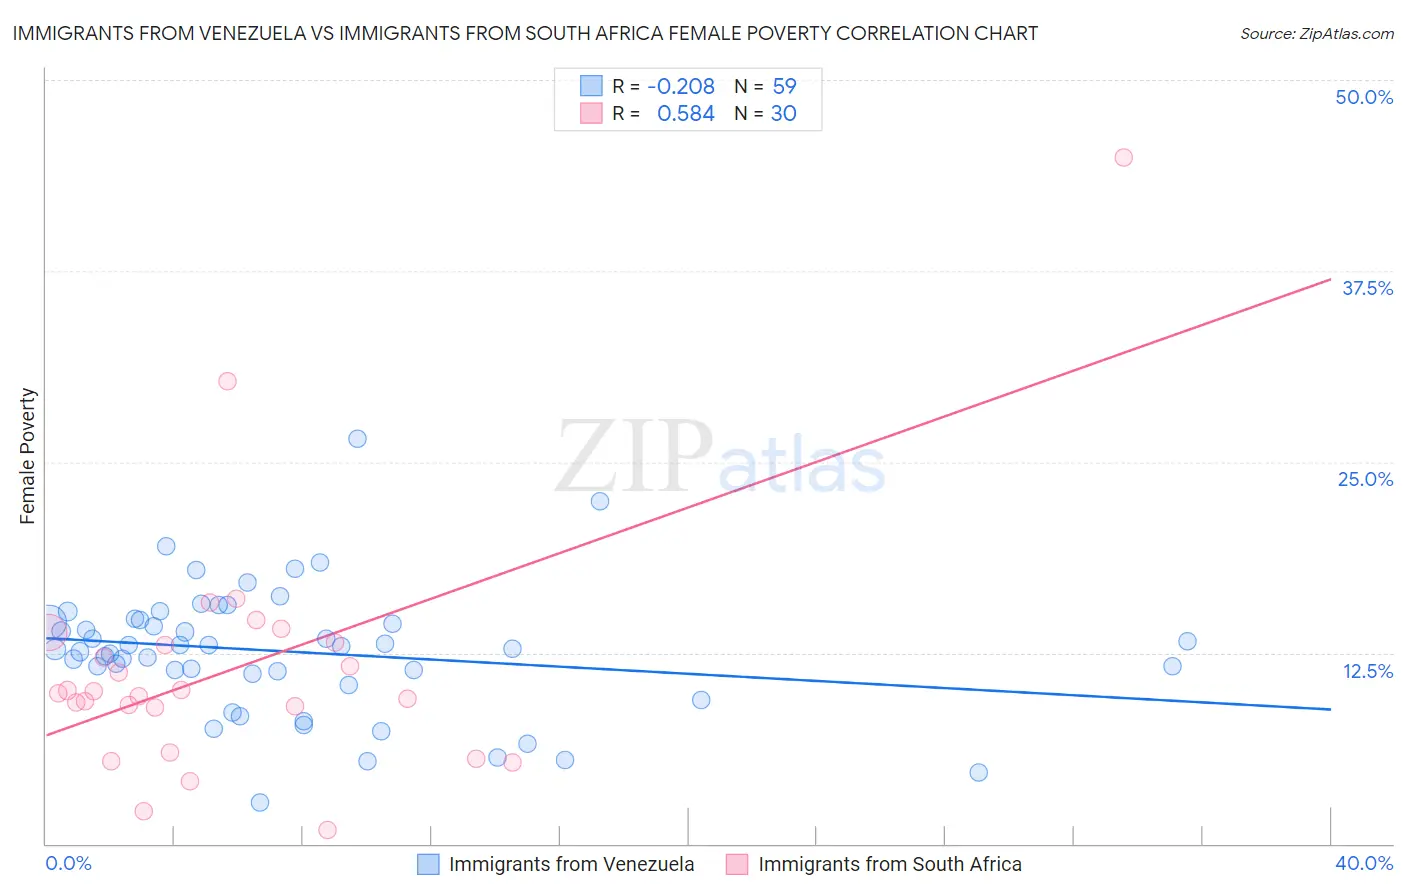 Immigrants from Venezuela vs Immigrants from South Africa Female Poverty